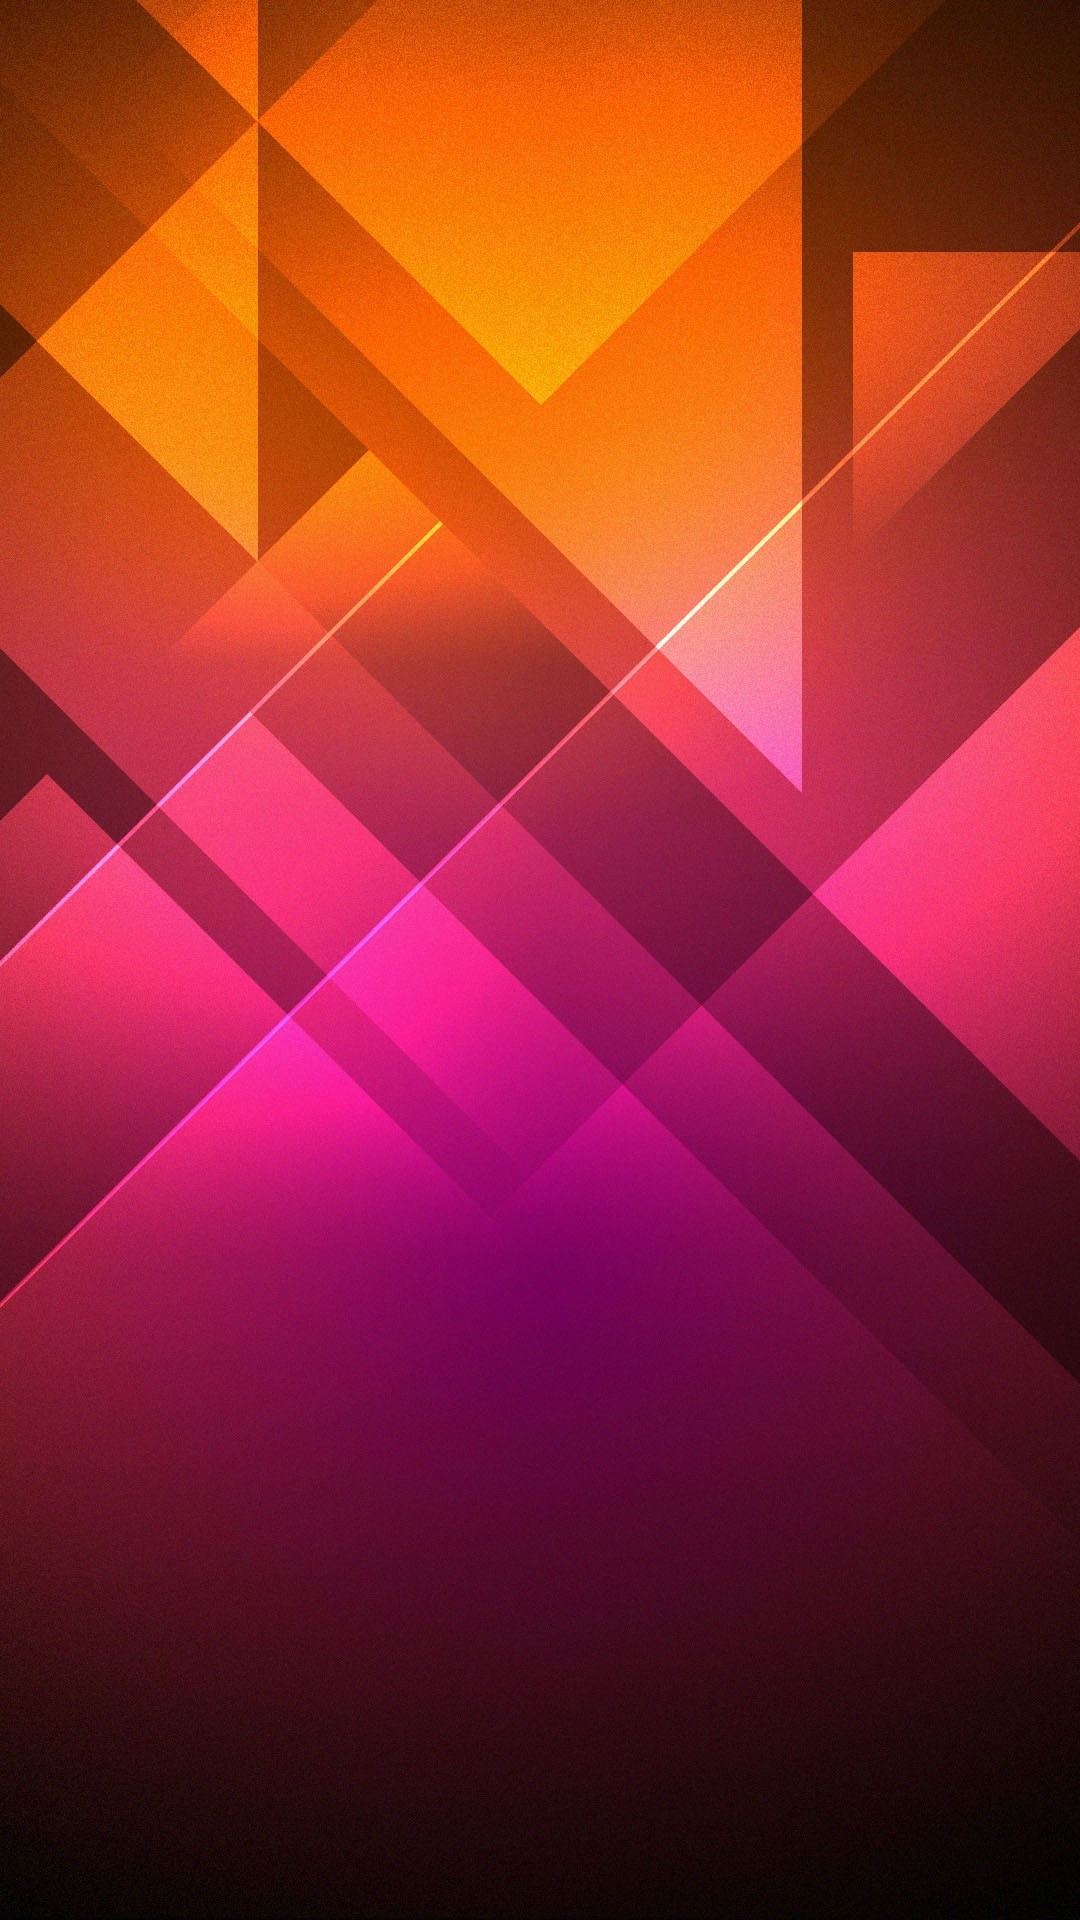 1080x1920 Abstract Pink Orange Triangles Android Wallpaper ...